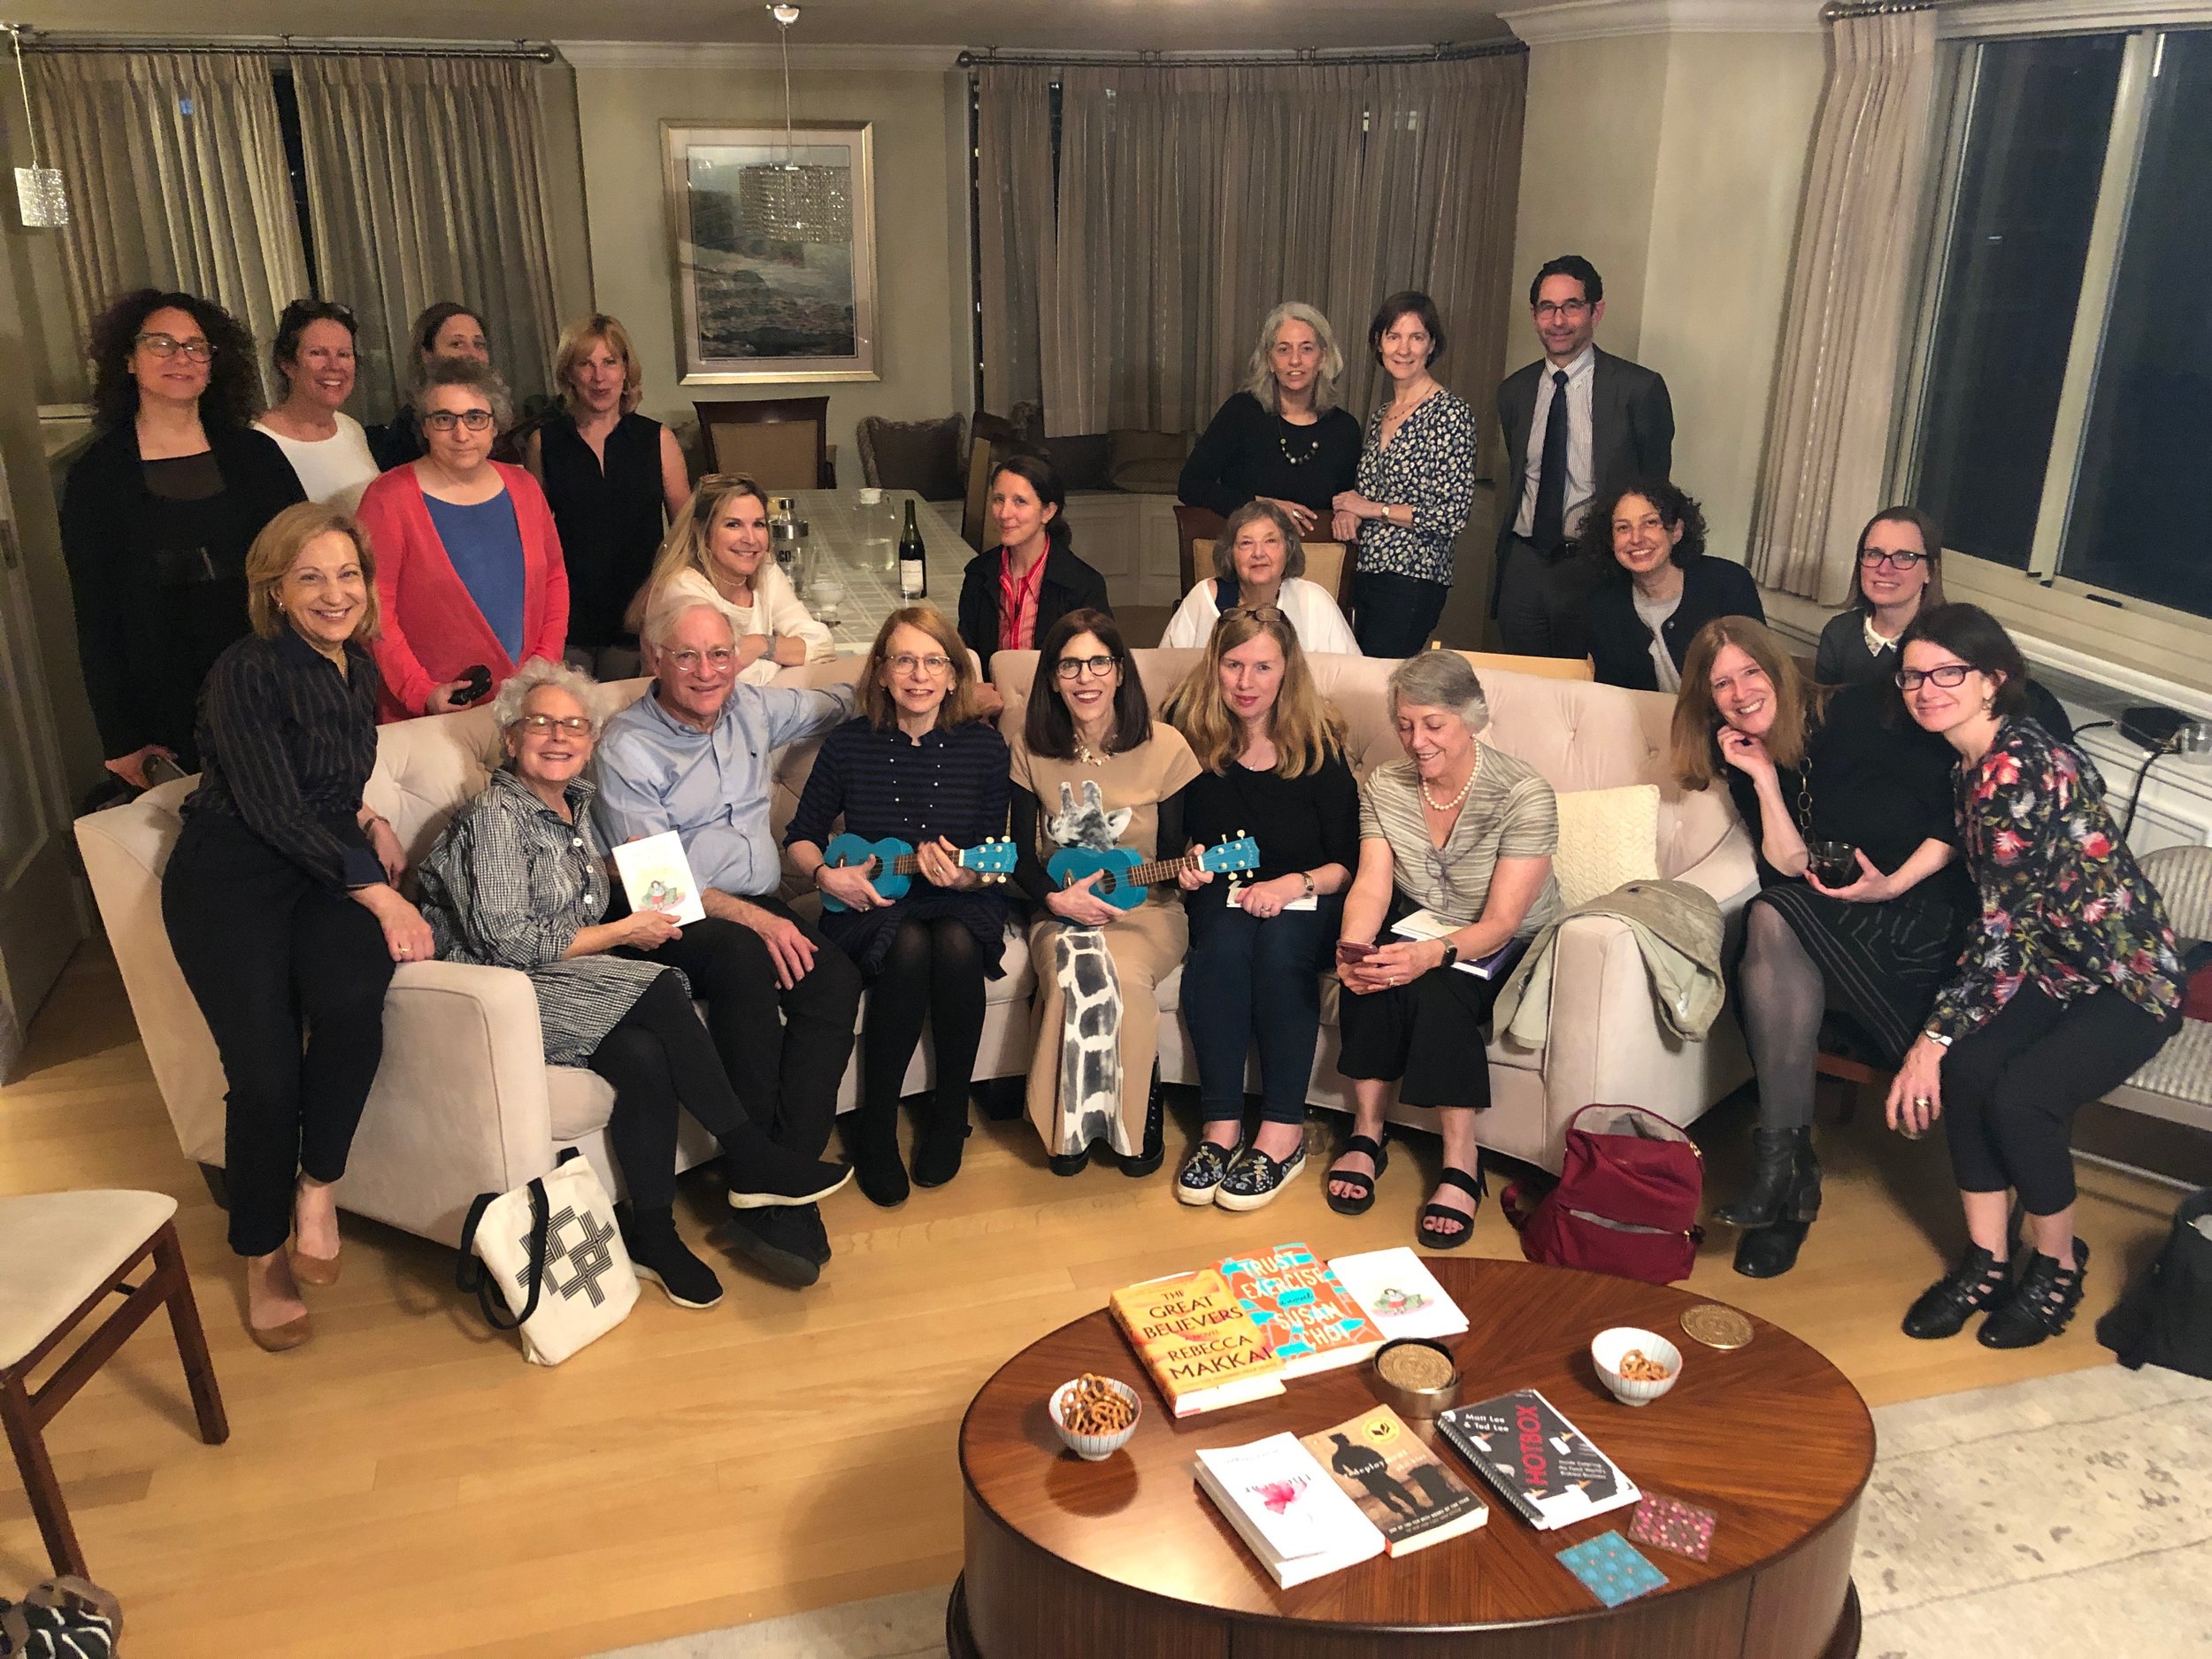 Roz Chast and Patty Marx, with ukuleles, at their book group for WHY DON'T YOU WRITE MY EULOGY NOW SO I CAN CORRECT IT?